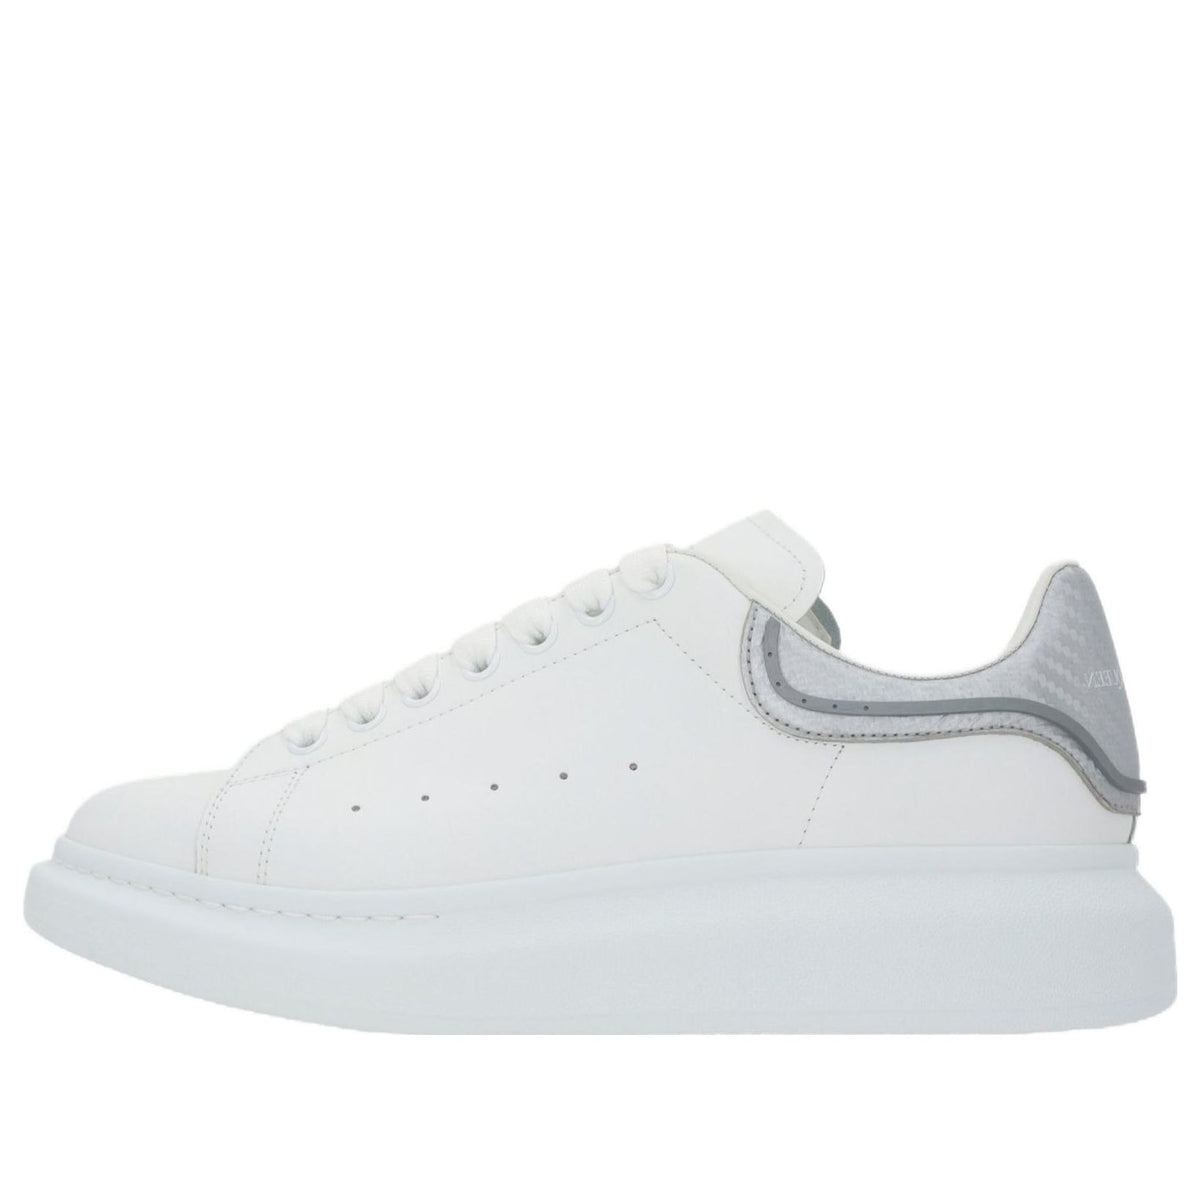 Alexander McQueen Oversized Low-Top Sneakers 'White Silver' 735770WICY